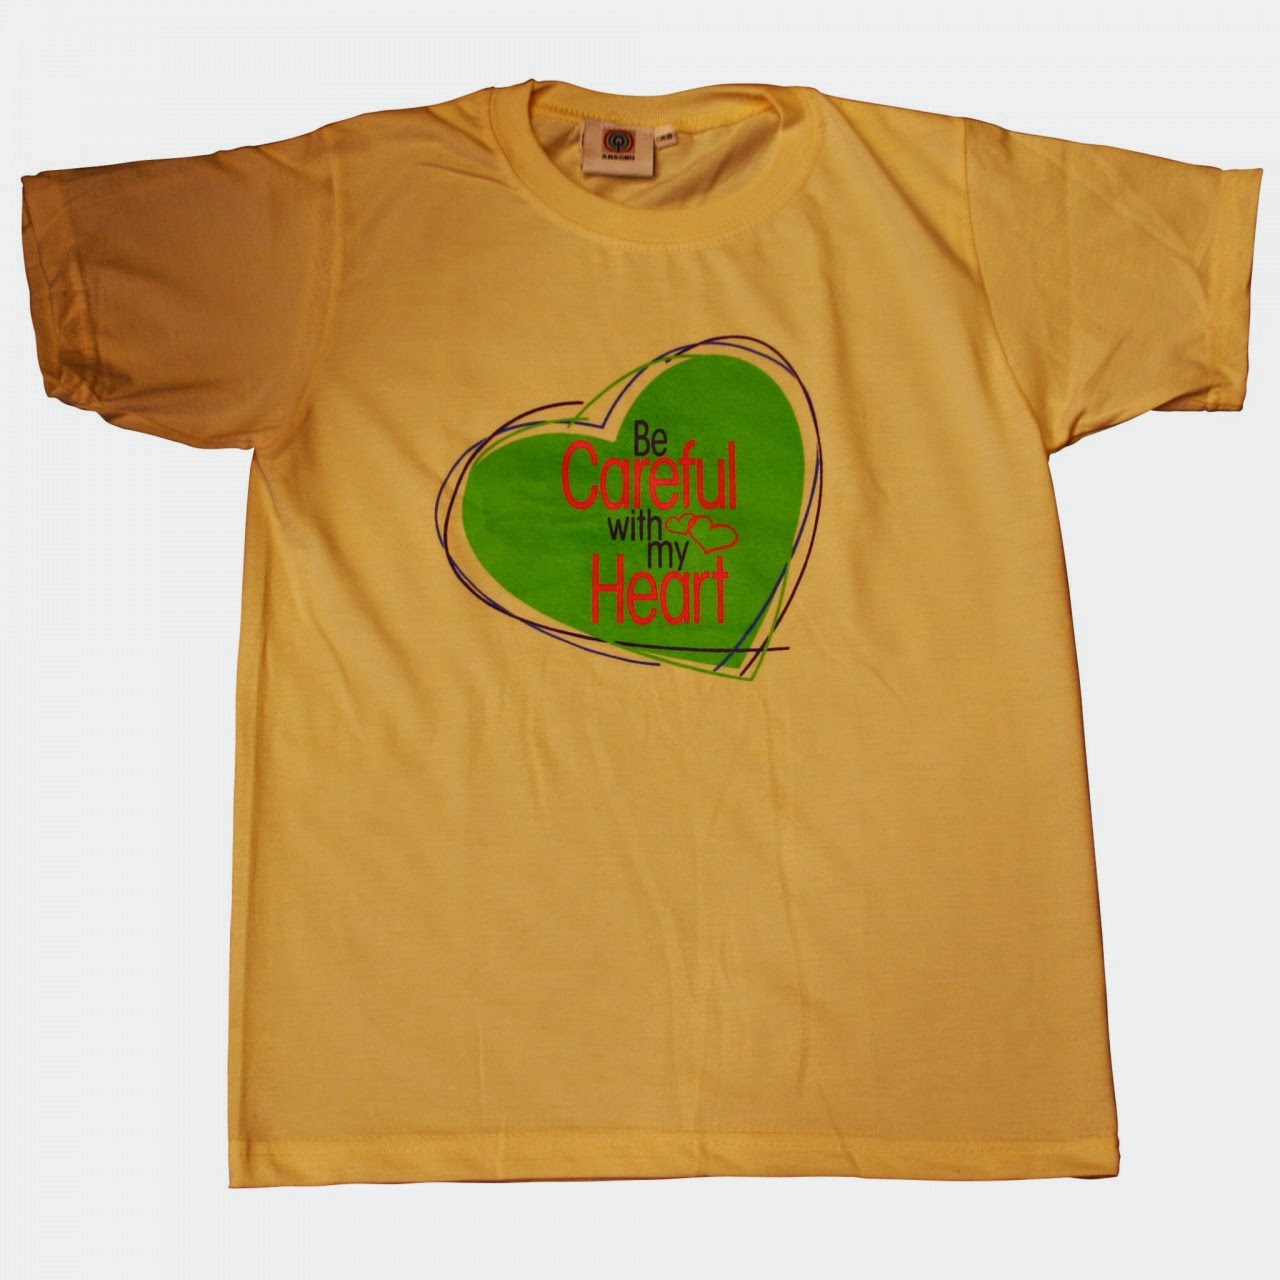  Be Careful With My Heart Yellow Shirt